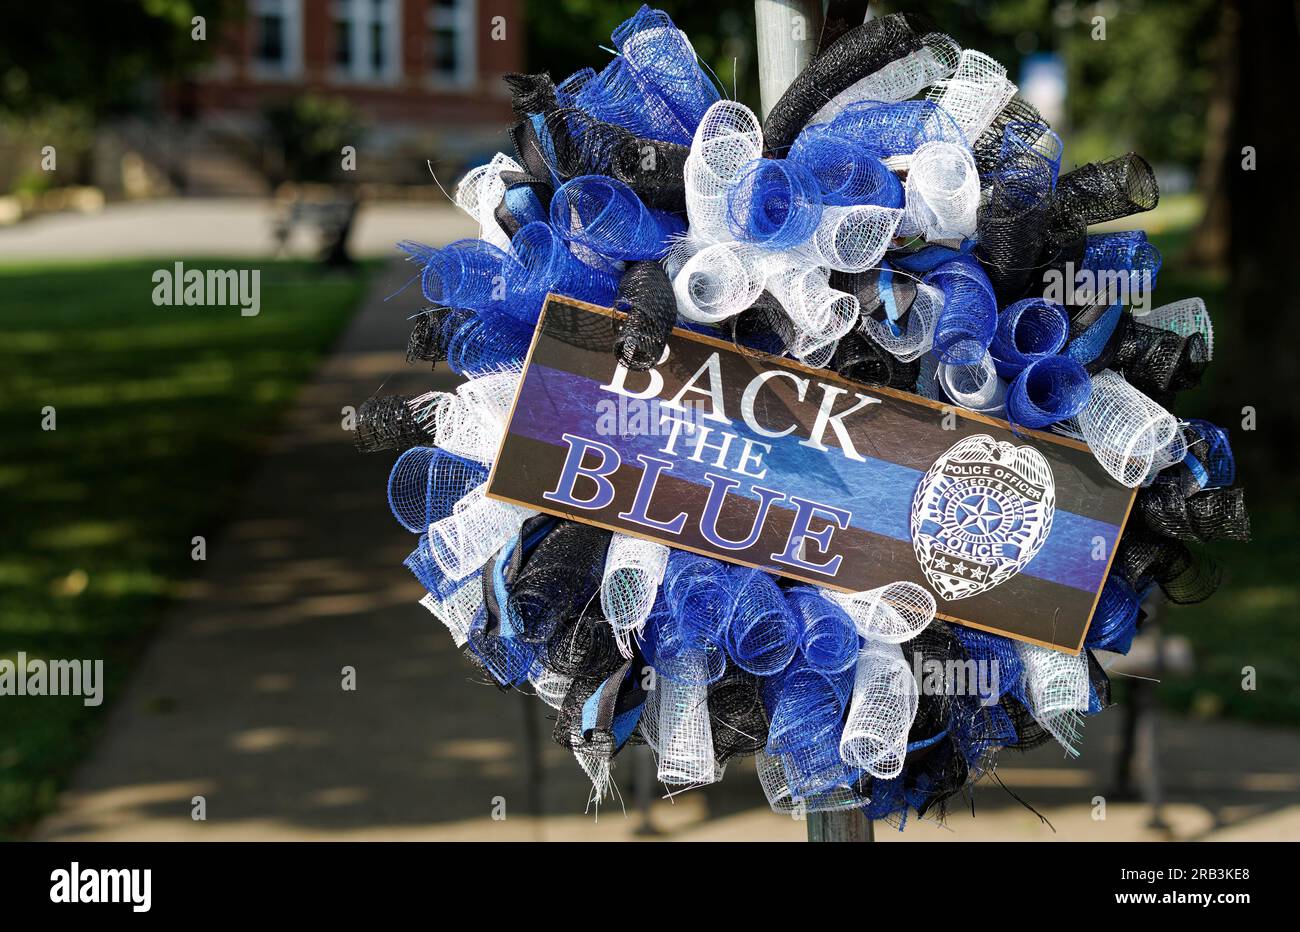 'Back the Blue' and an illustration of a police badge adorn a wreath hanging near the patrol vehicle of Tell City Police Department Sgt. Heather J. Glenn on Thursday, July 6, 2023 near city hall in Tell City, Troy Township, Perry County, IN, USA. Glenn, 47, was shot and killed July 3 while trying to arrest a domestic violence suspect at a local hospital, becoming the first line-of-duty death in the Tell City Police Department's nearly 165-year history and second Indiana police officer to be killed in the line of duty in less than a week. (Apex MediaWire Photo by Billy Suratt) Stock Photo